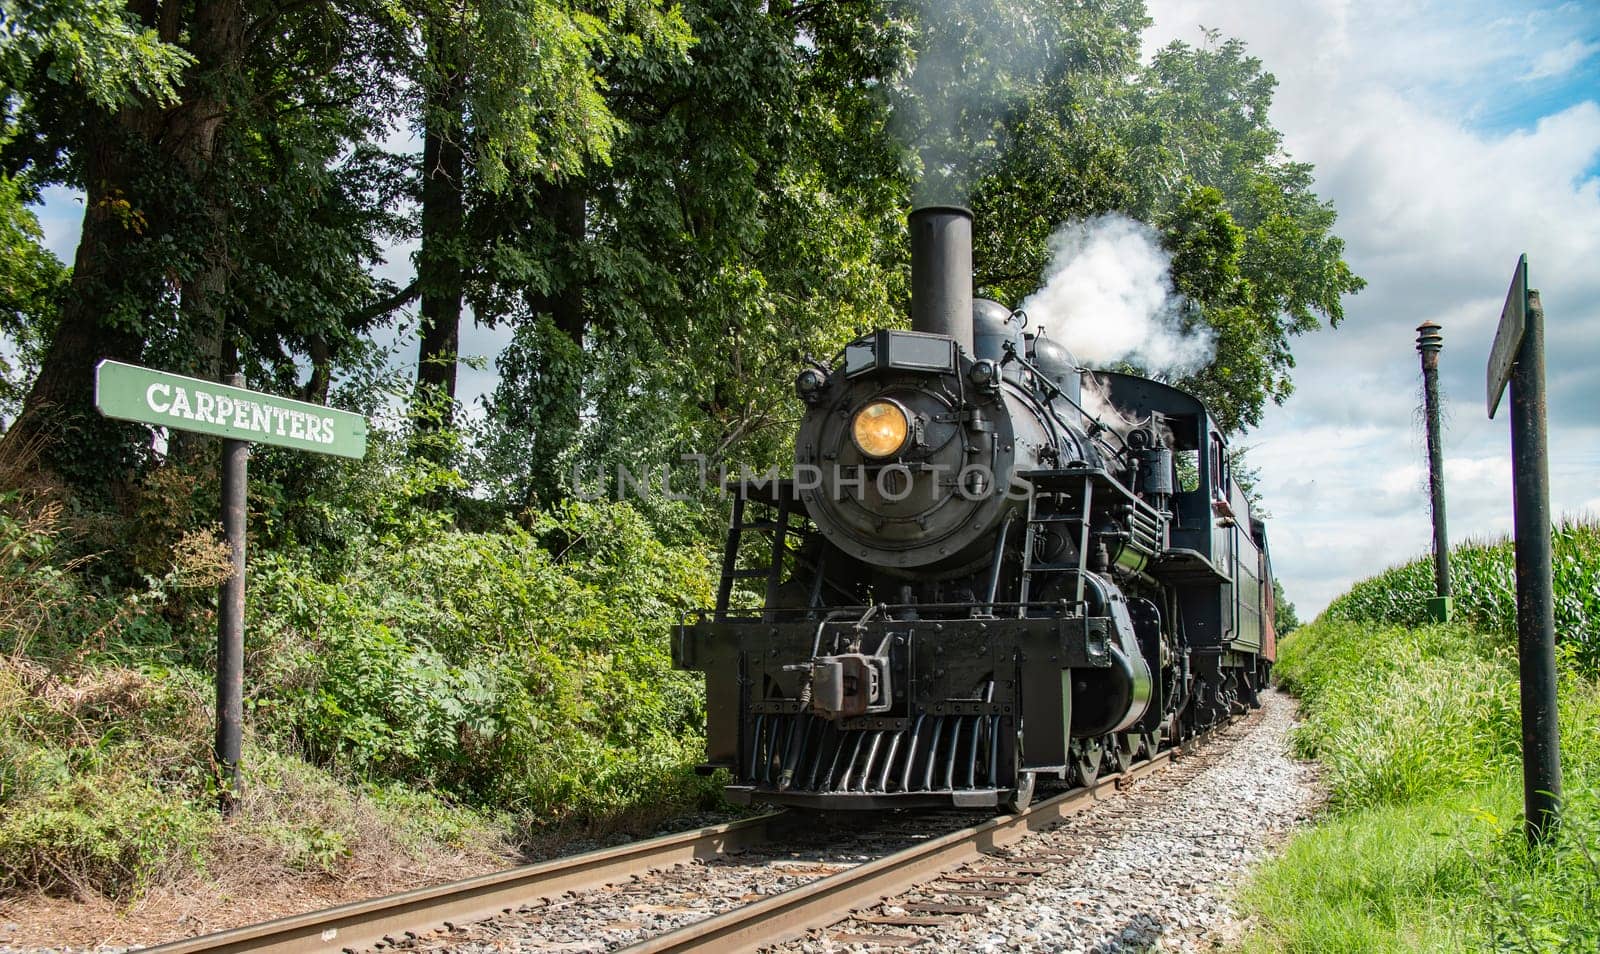 Historic Number 89 Steam Train Approaching 'Carpenters' Station Amid Lush Trees On A Clear Day.